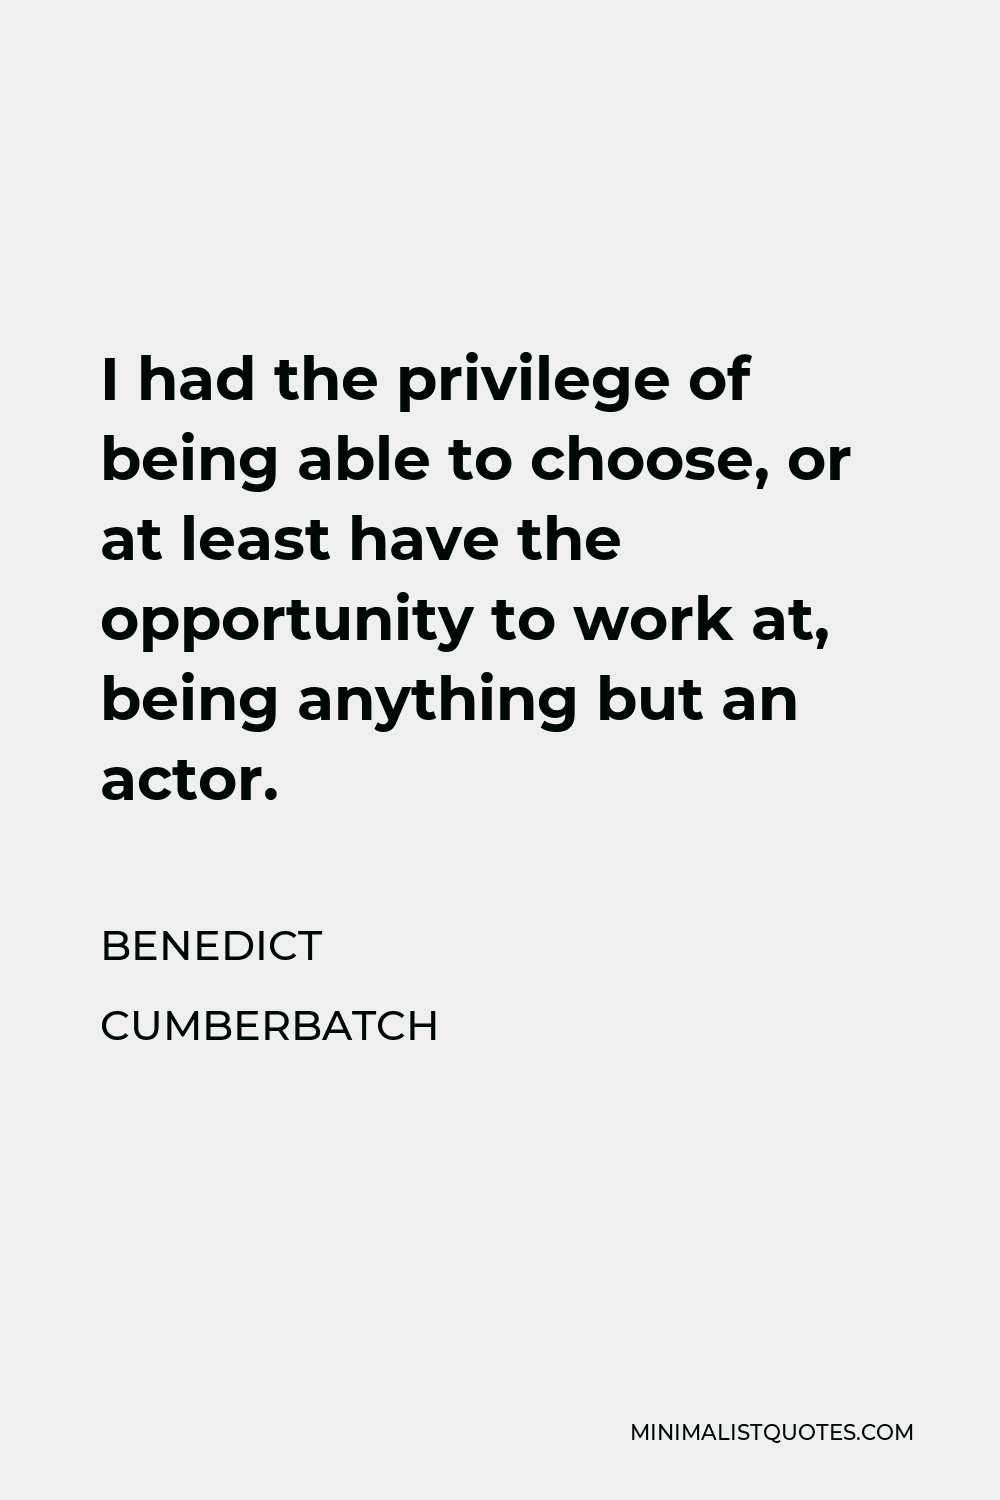 Benedict Cumberbatch Quote - I had the privilege of being able to choose, or at least have the opportunity to work at, being anything but an actor.